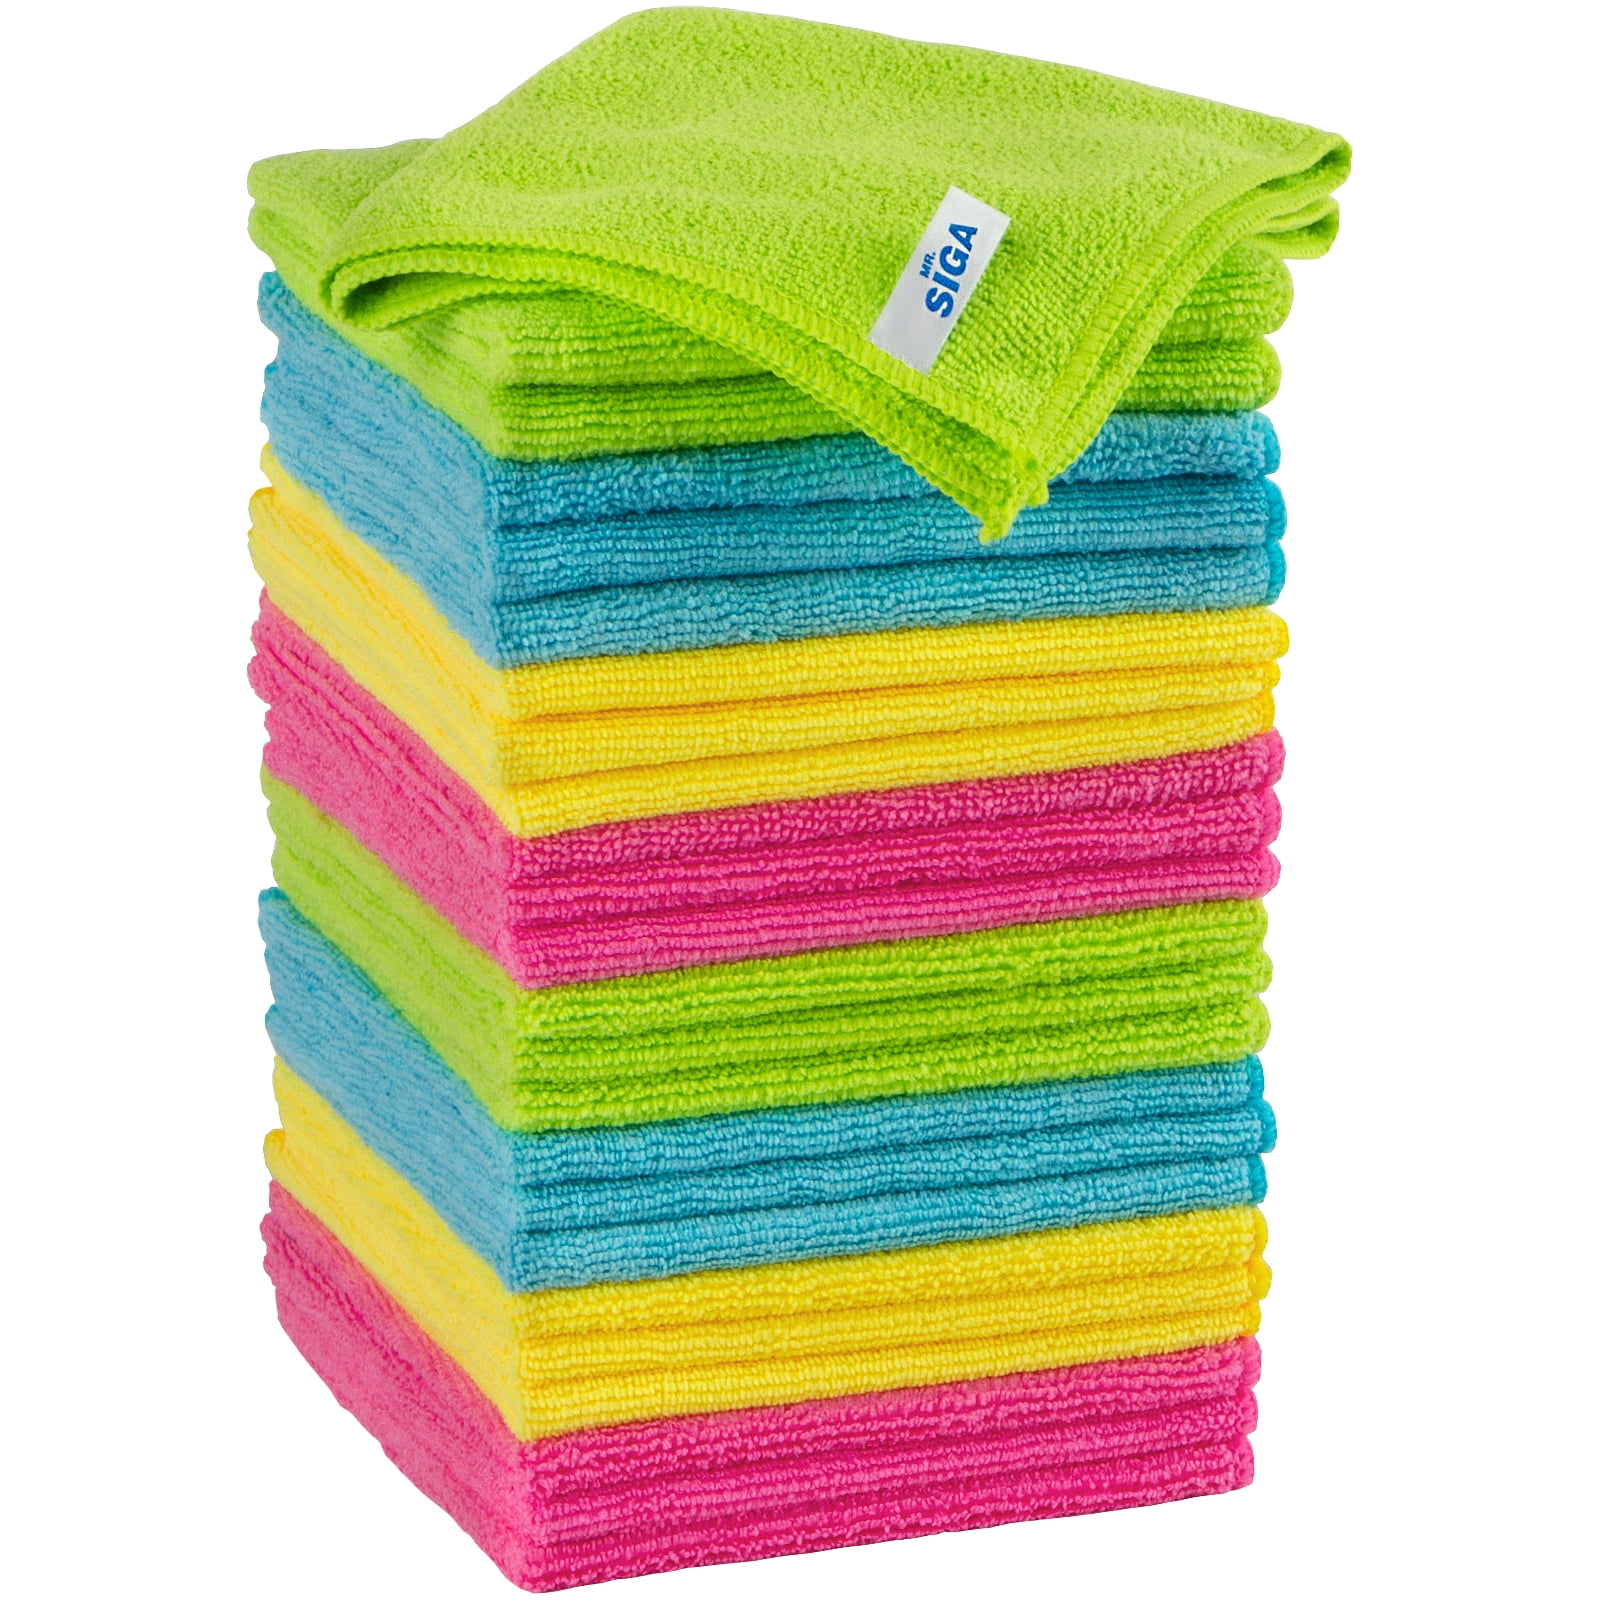 MR.SIGA Microfiber Cleaning Cloth,Pack of 12,Size:12.6" x 12.6 